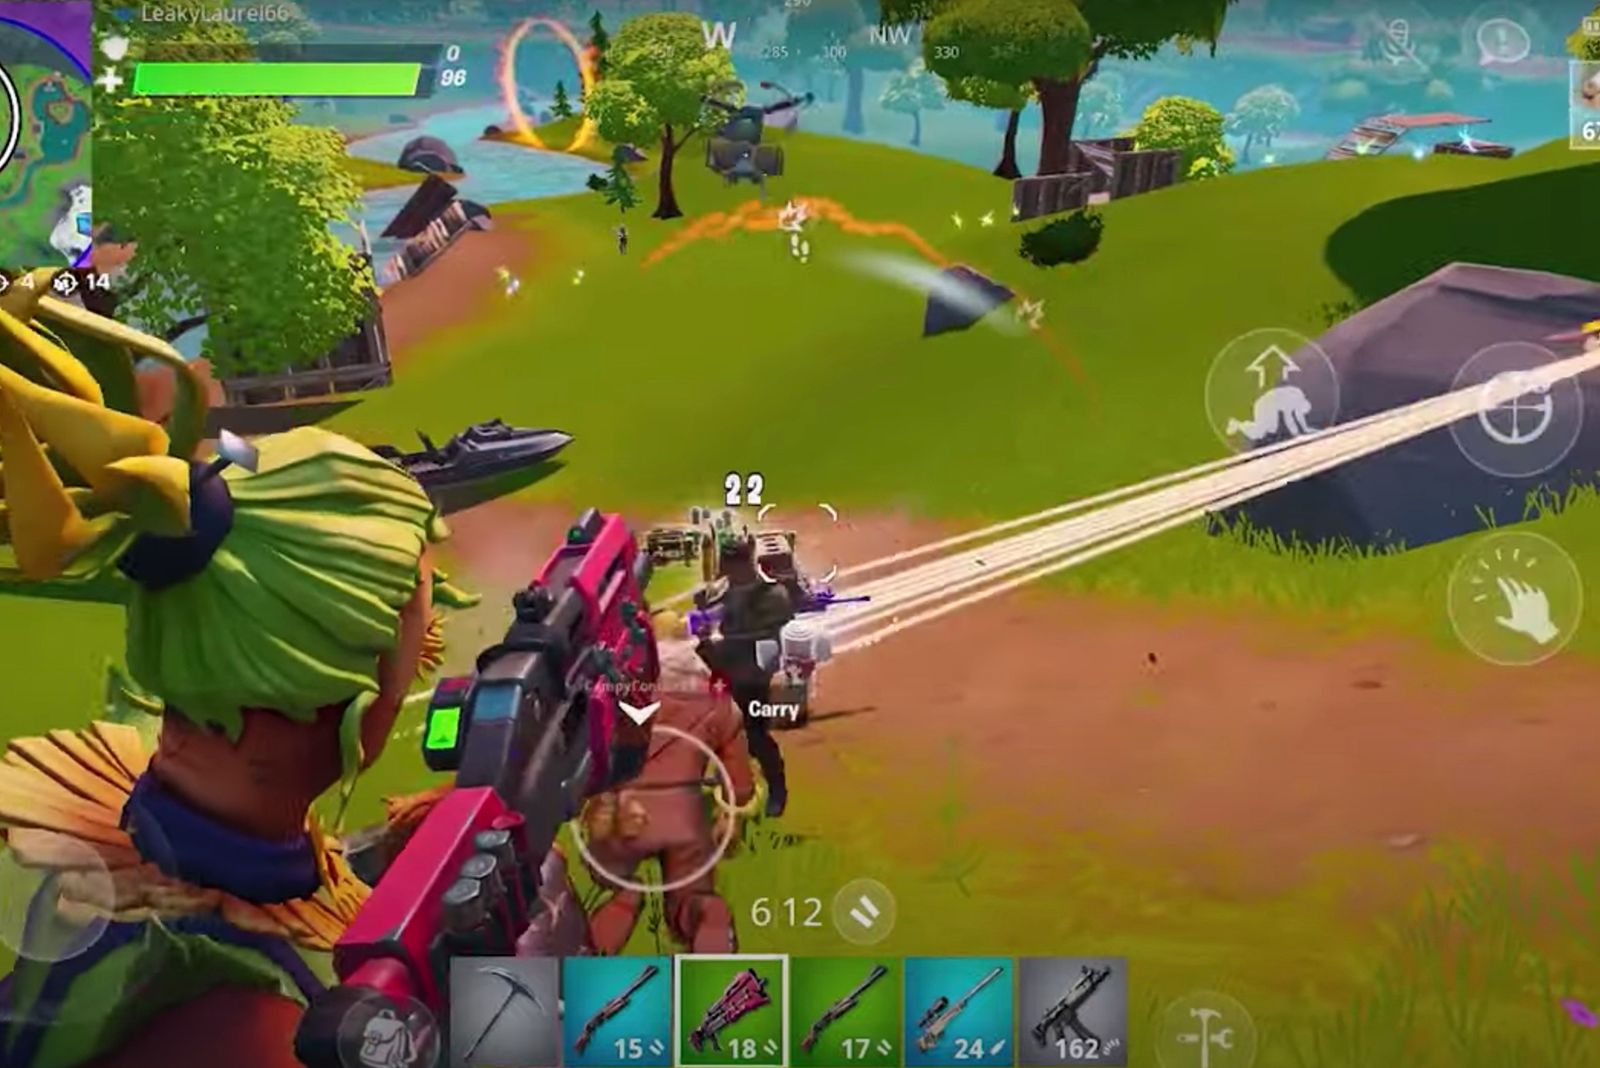 Epic finally releases Fortnite on Play Store and slams Google while doing so image 1